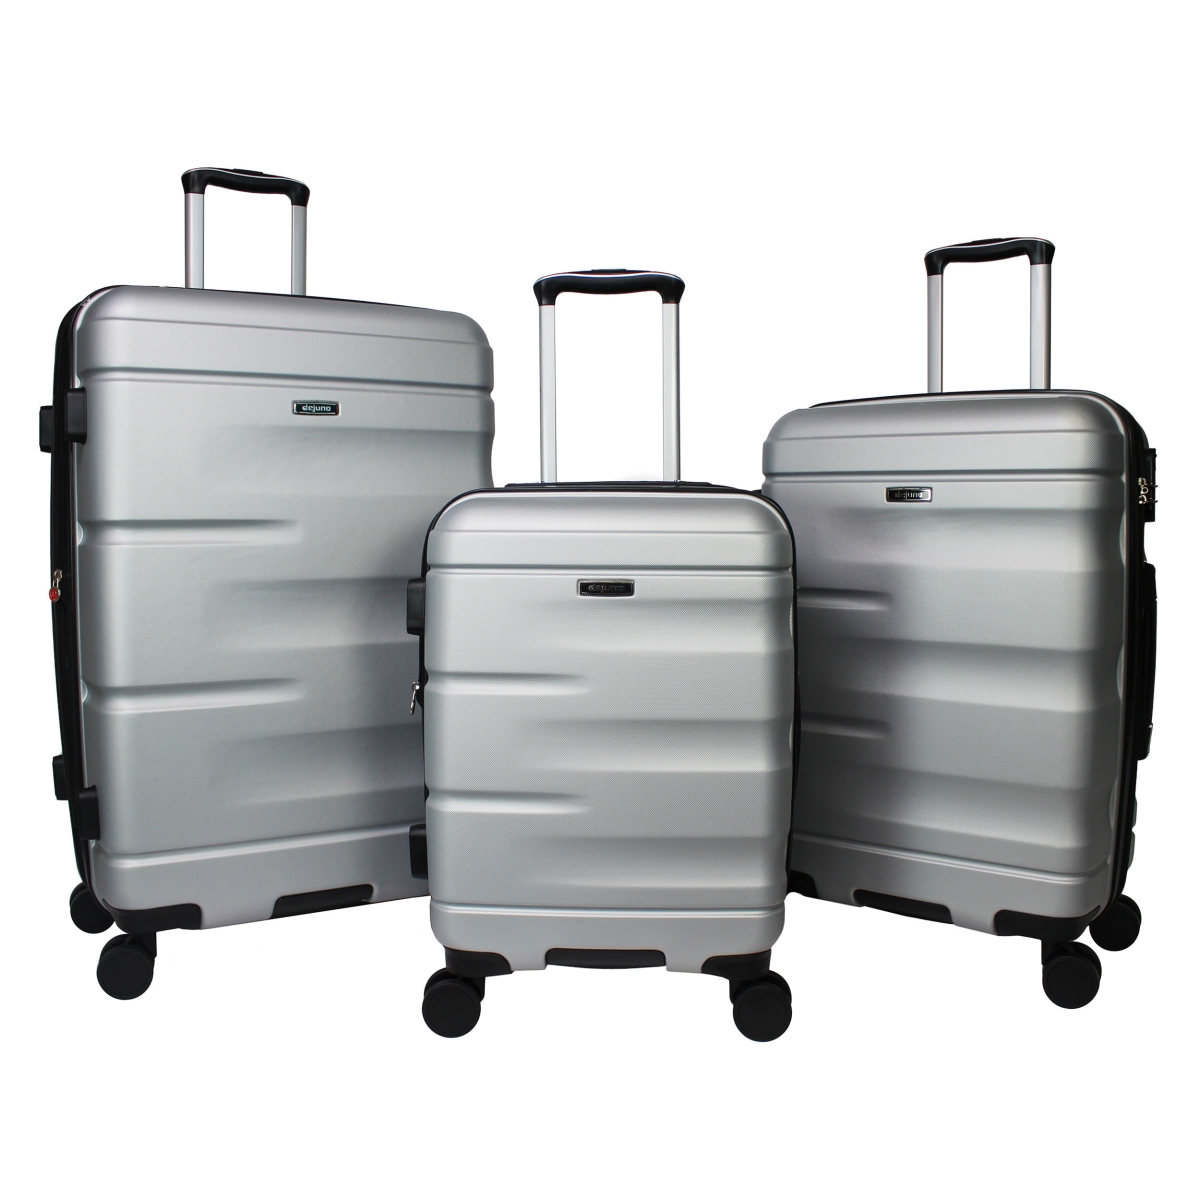 25dj-605-silver 3 Piece Emerson Hardside Lightweight Expandable Spinner Luggage Set - Silver